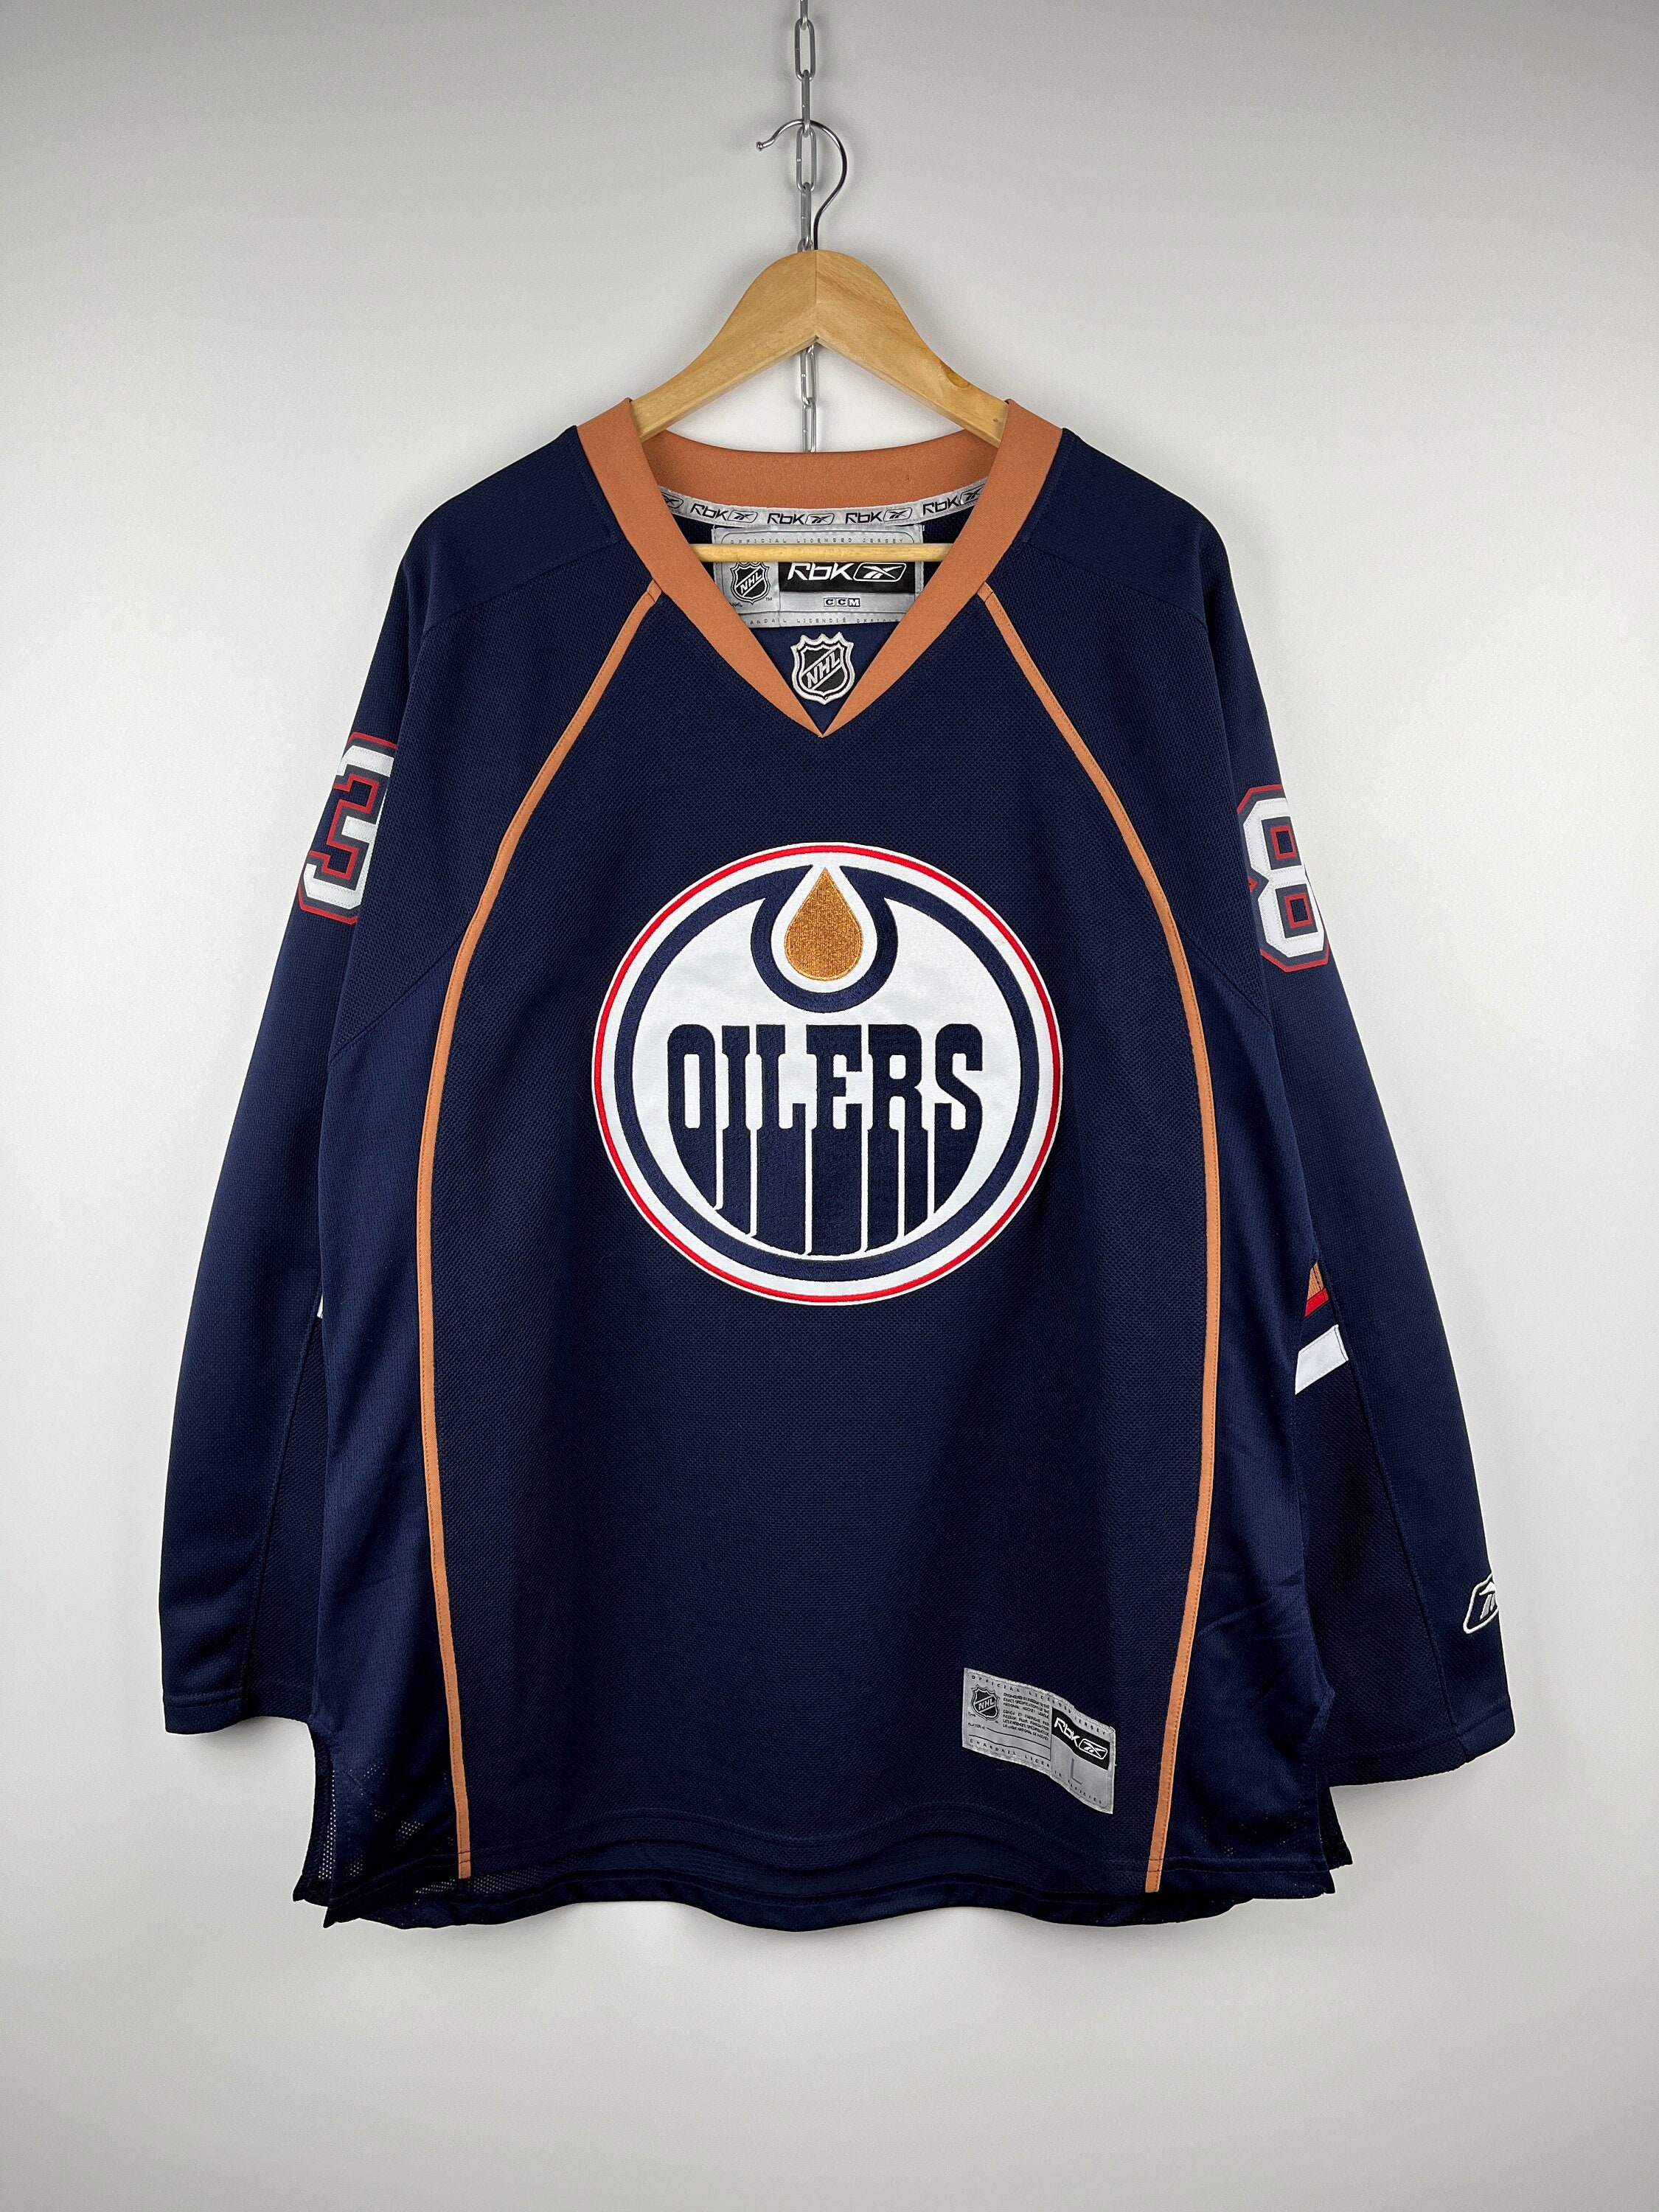 Custom Edmonton Oilers Retro Gradient Design Sweatshirt NHL Hoodie 3D -  Bring Your Ideas, Thoughts And Imaginations Into Reality Today